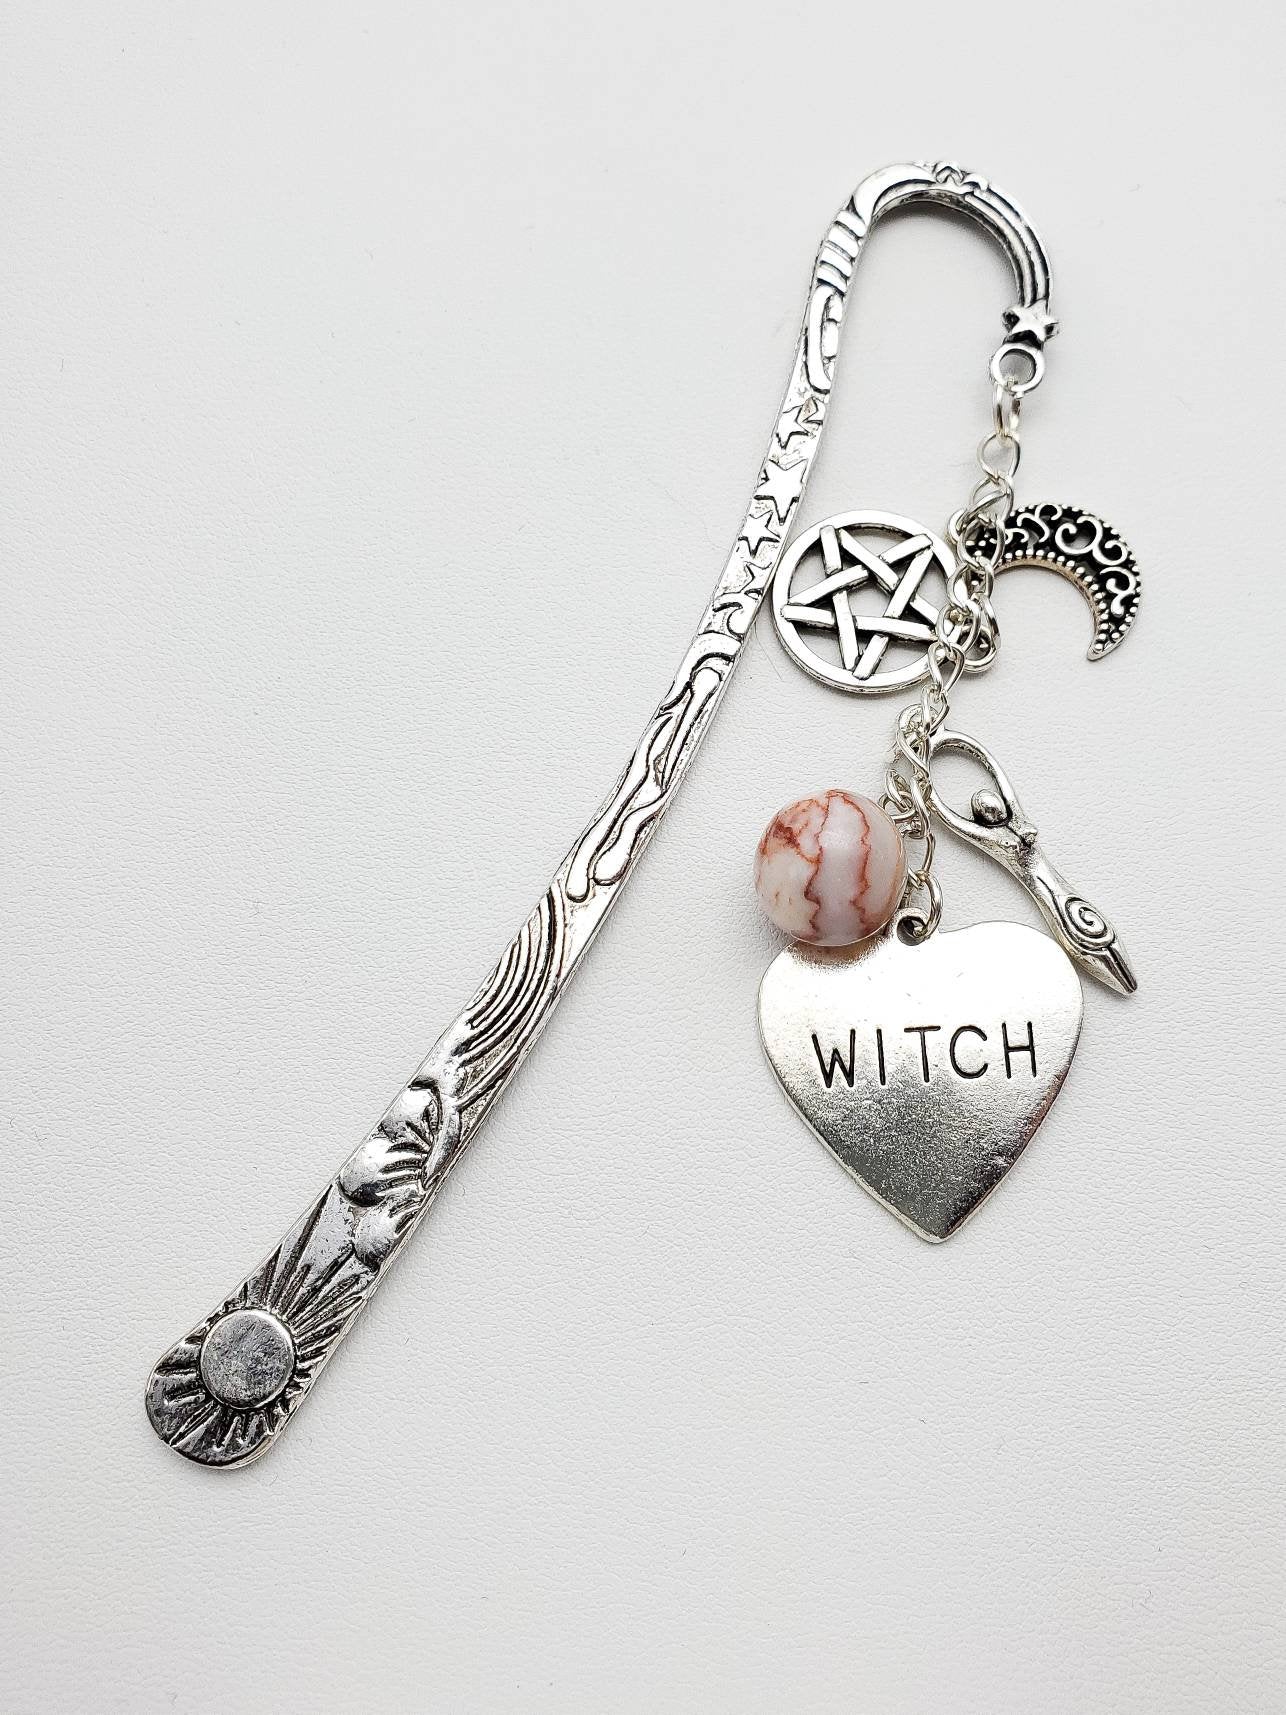 Bookmark with Carnelian Crystal Ball, Moon, Pentacle, Goddess and Heart Charms - The Caffeinated Raven